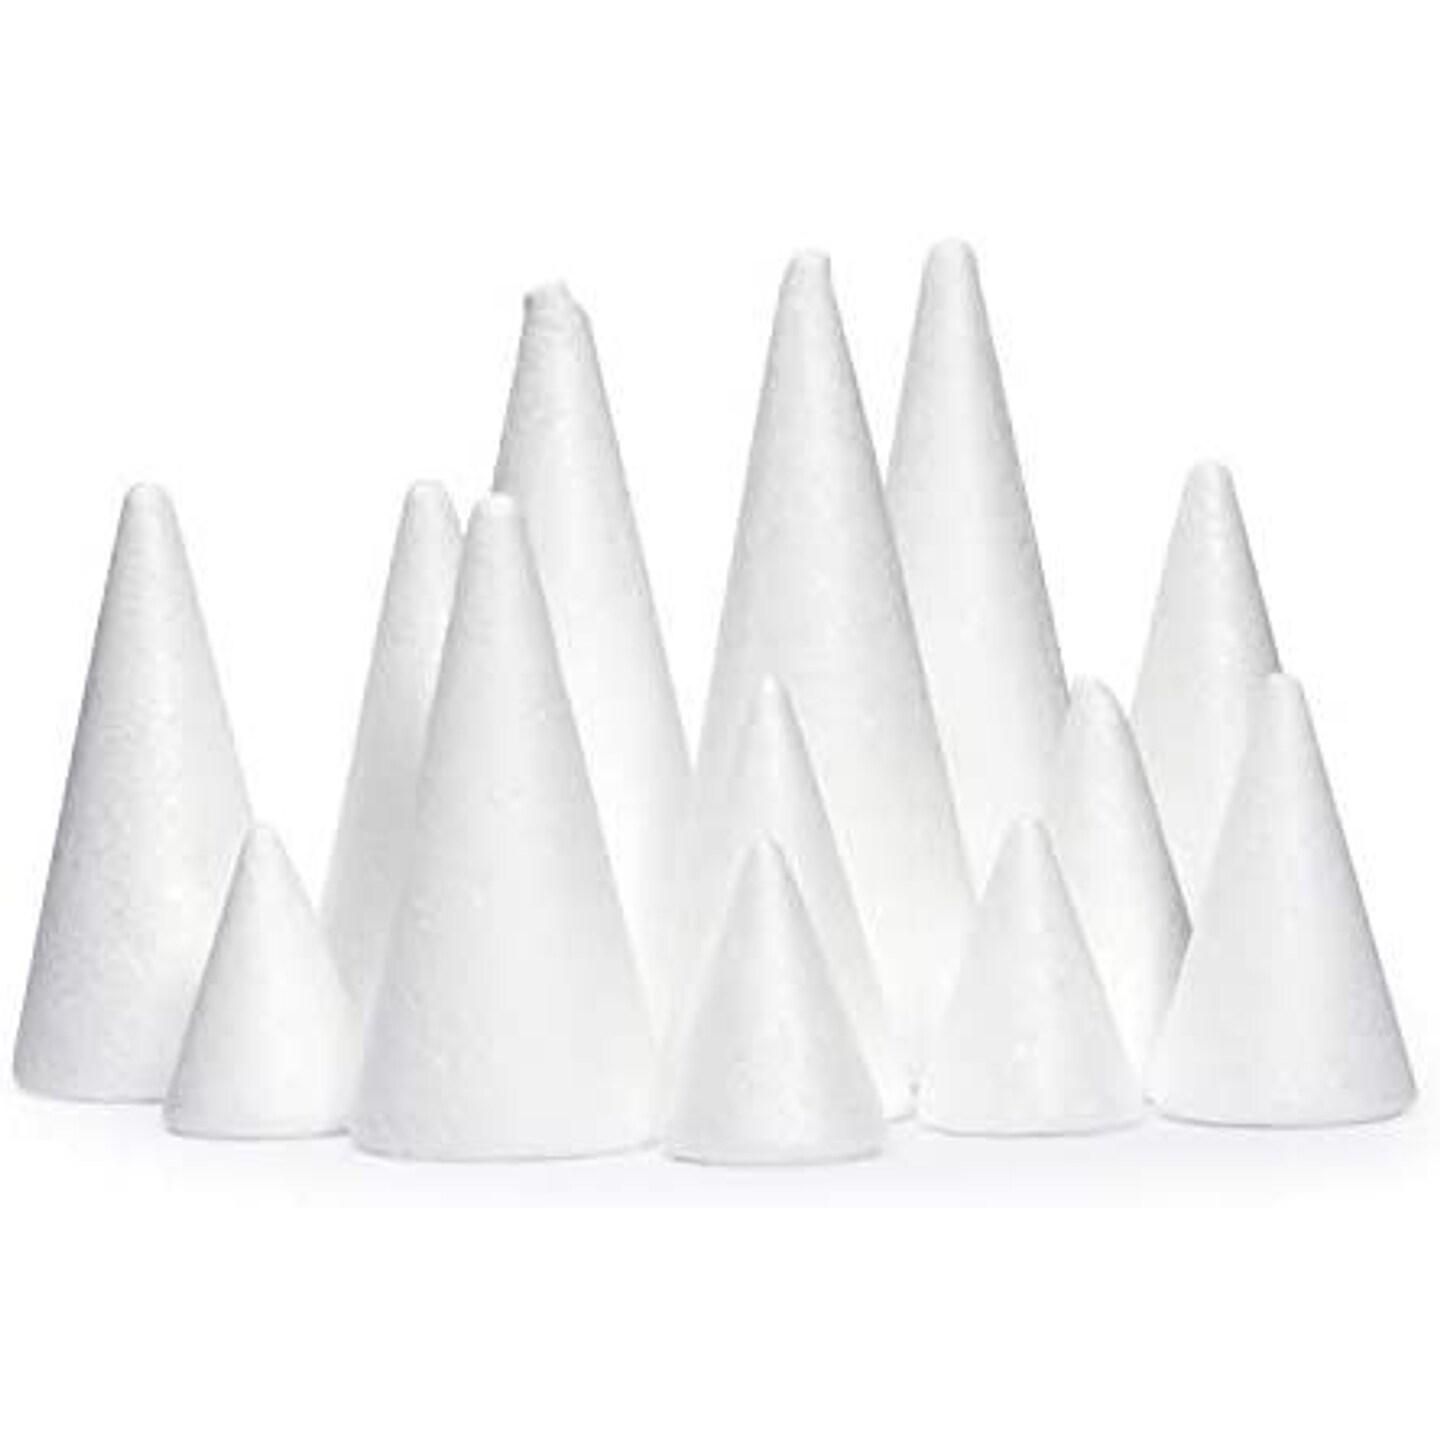 White Foam Cones for Crafts, 4 Assorted Sizes (2.3-6 In, 16 Pack